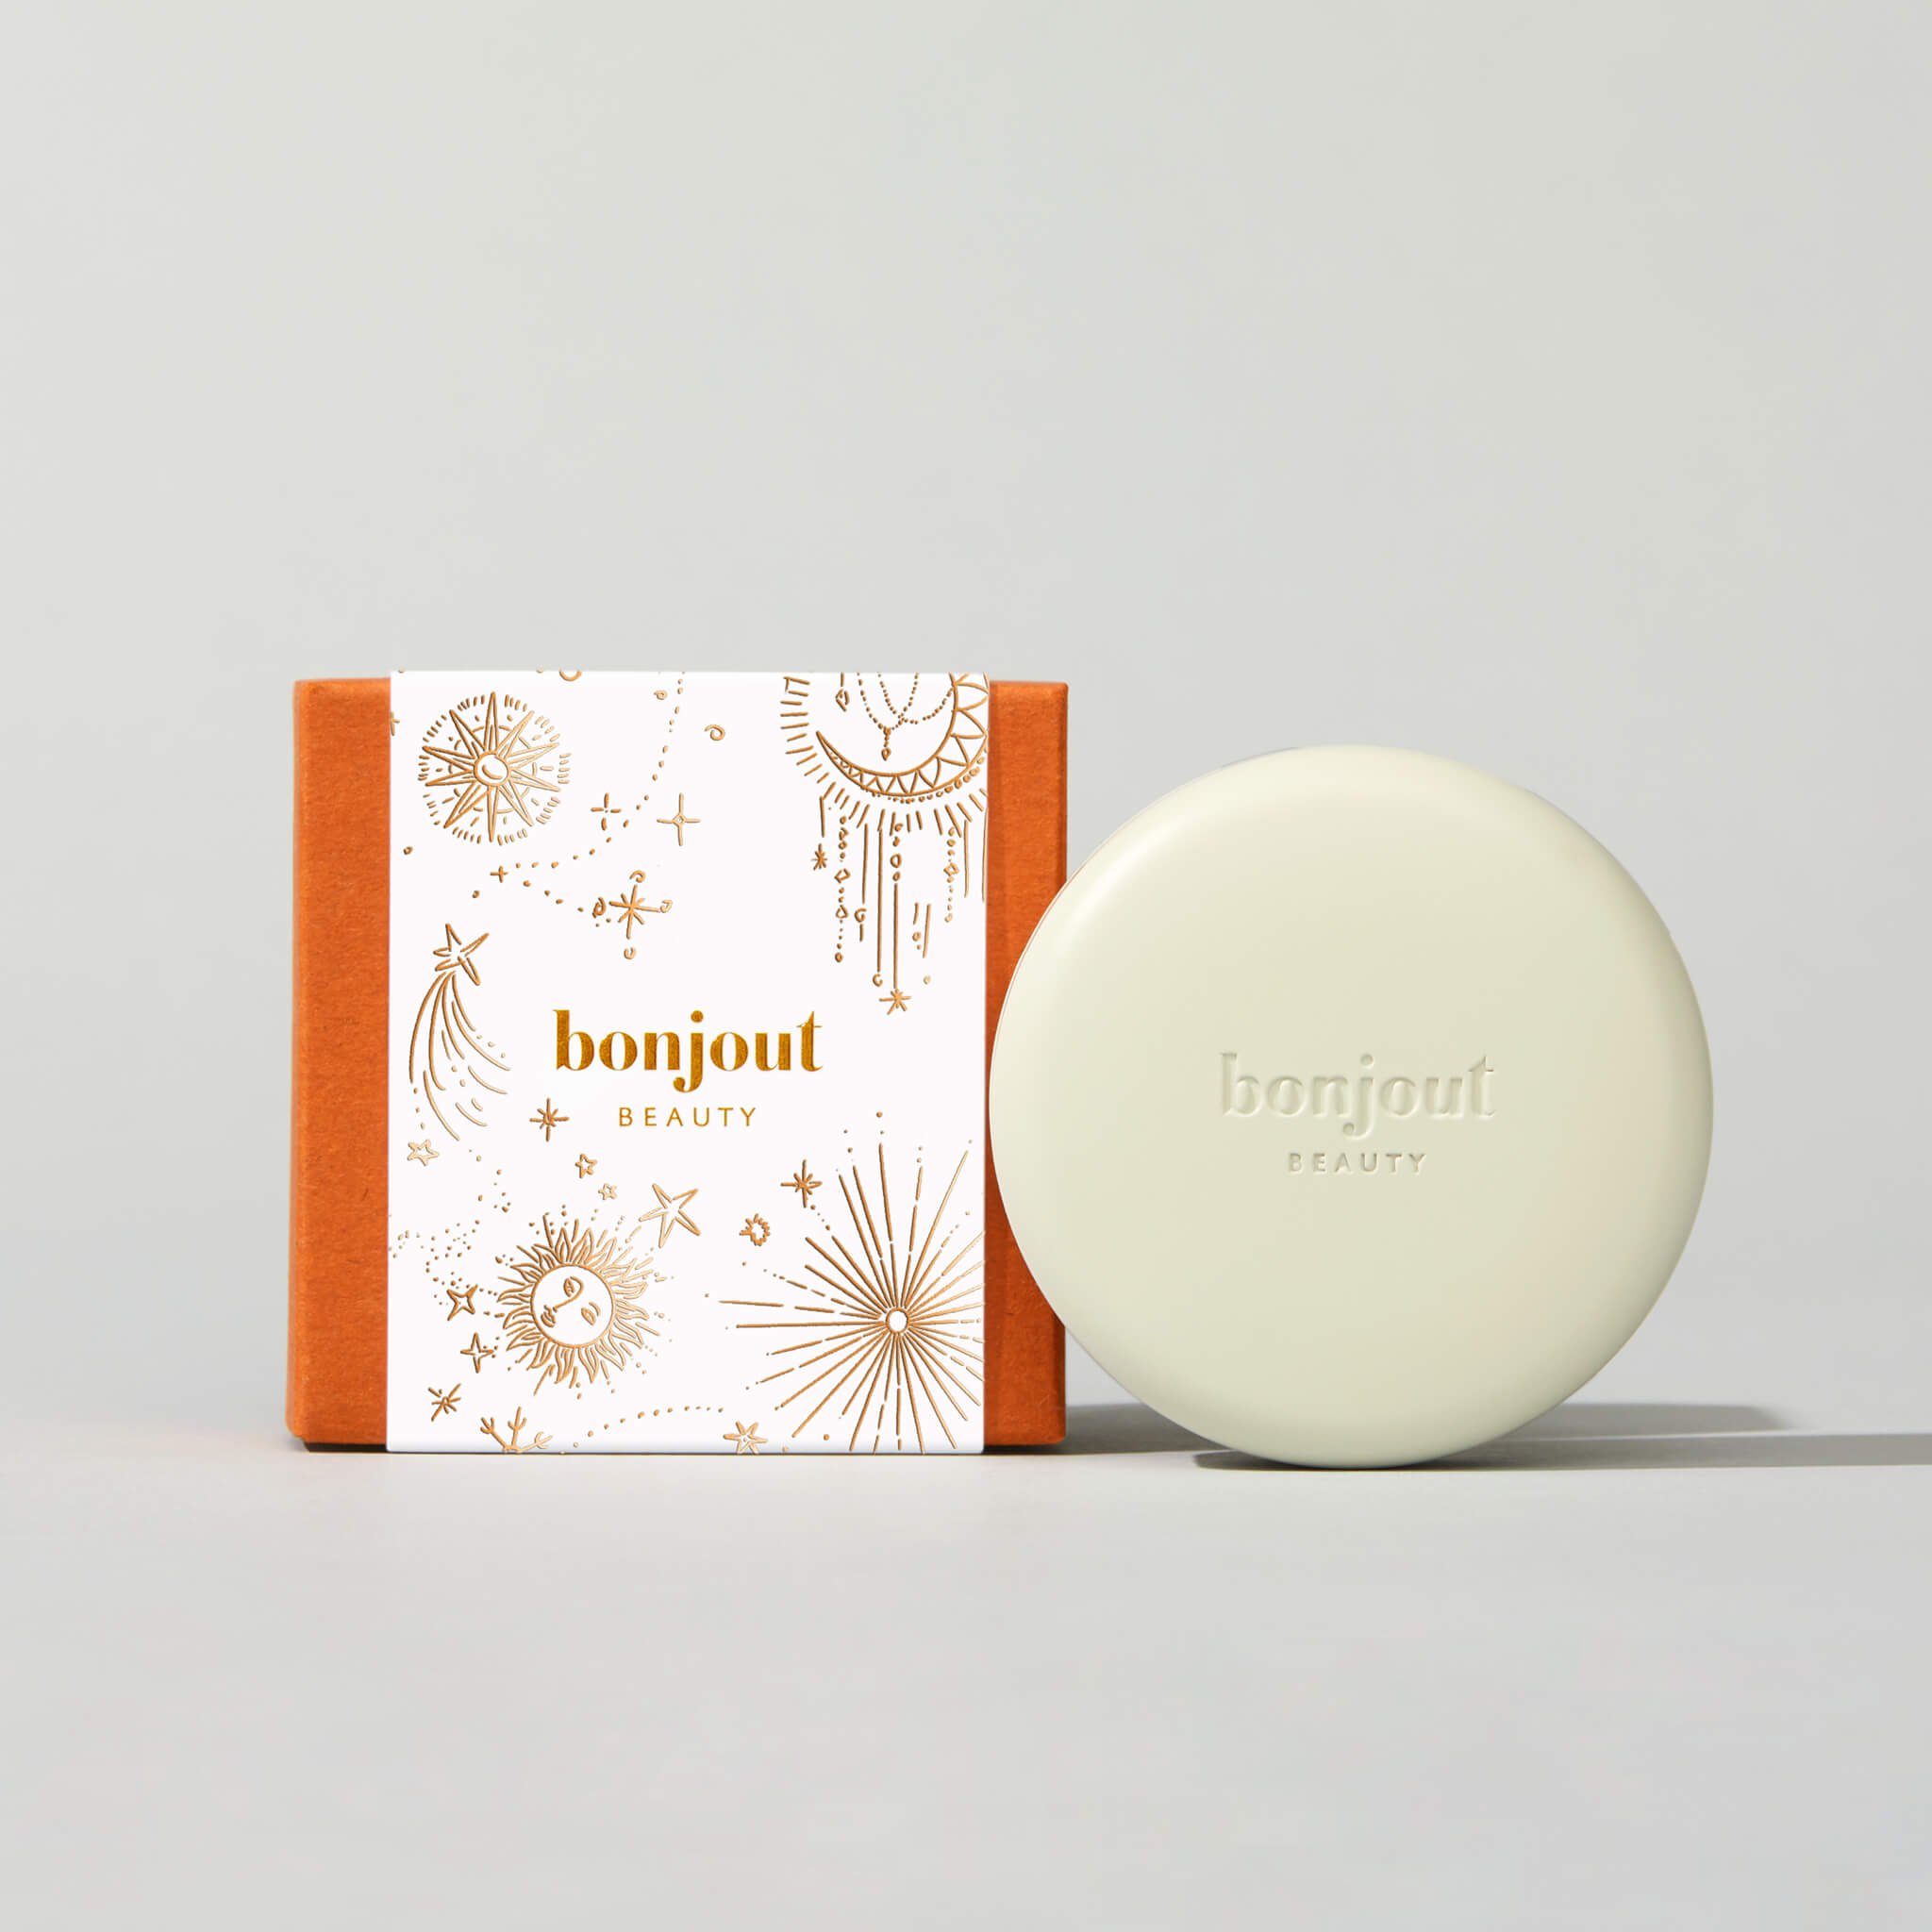 Bonjout Beauty's Le Balm Holiday Limited Edition Packaging